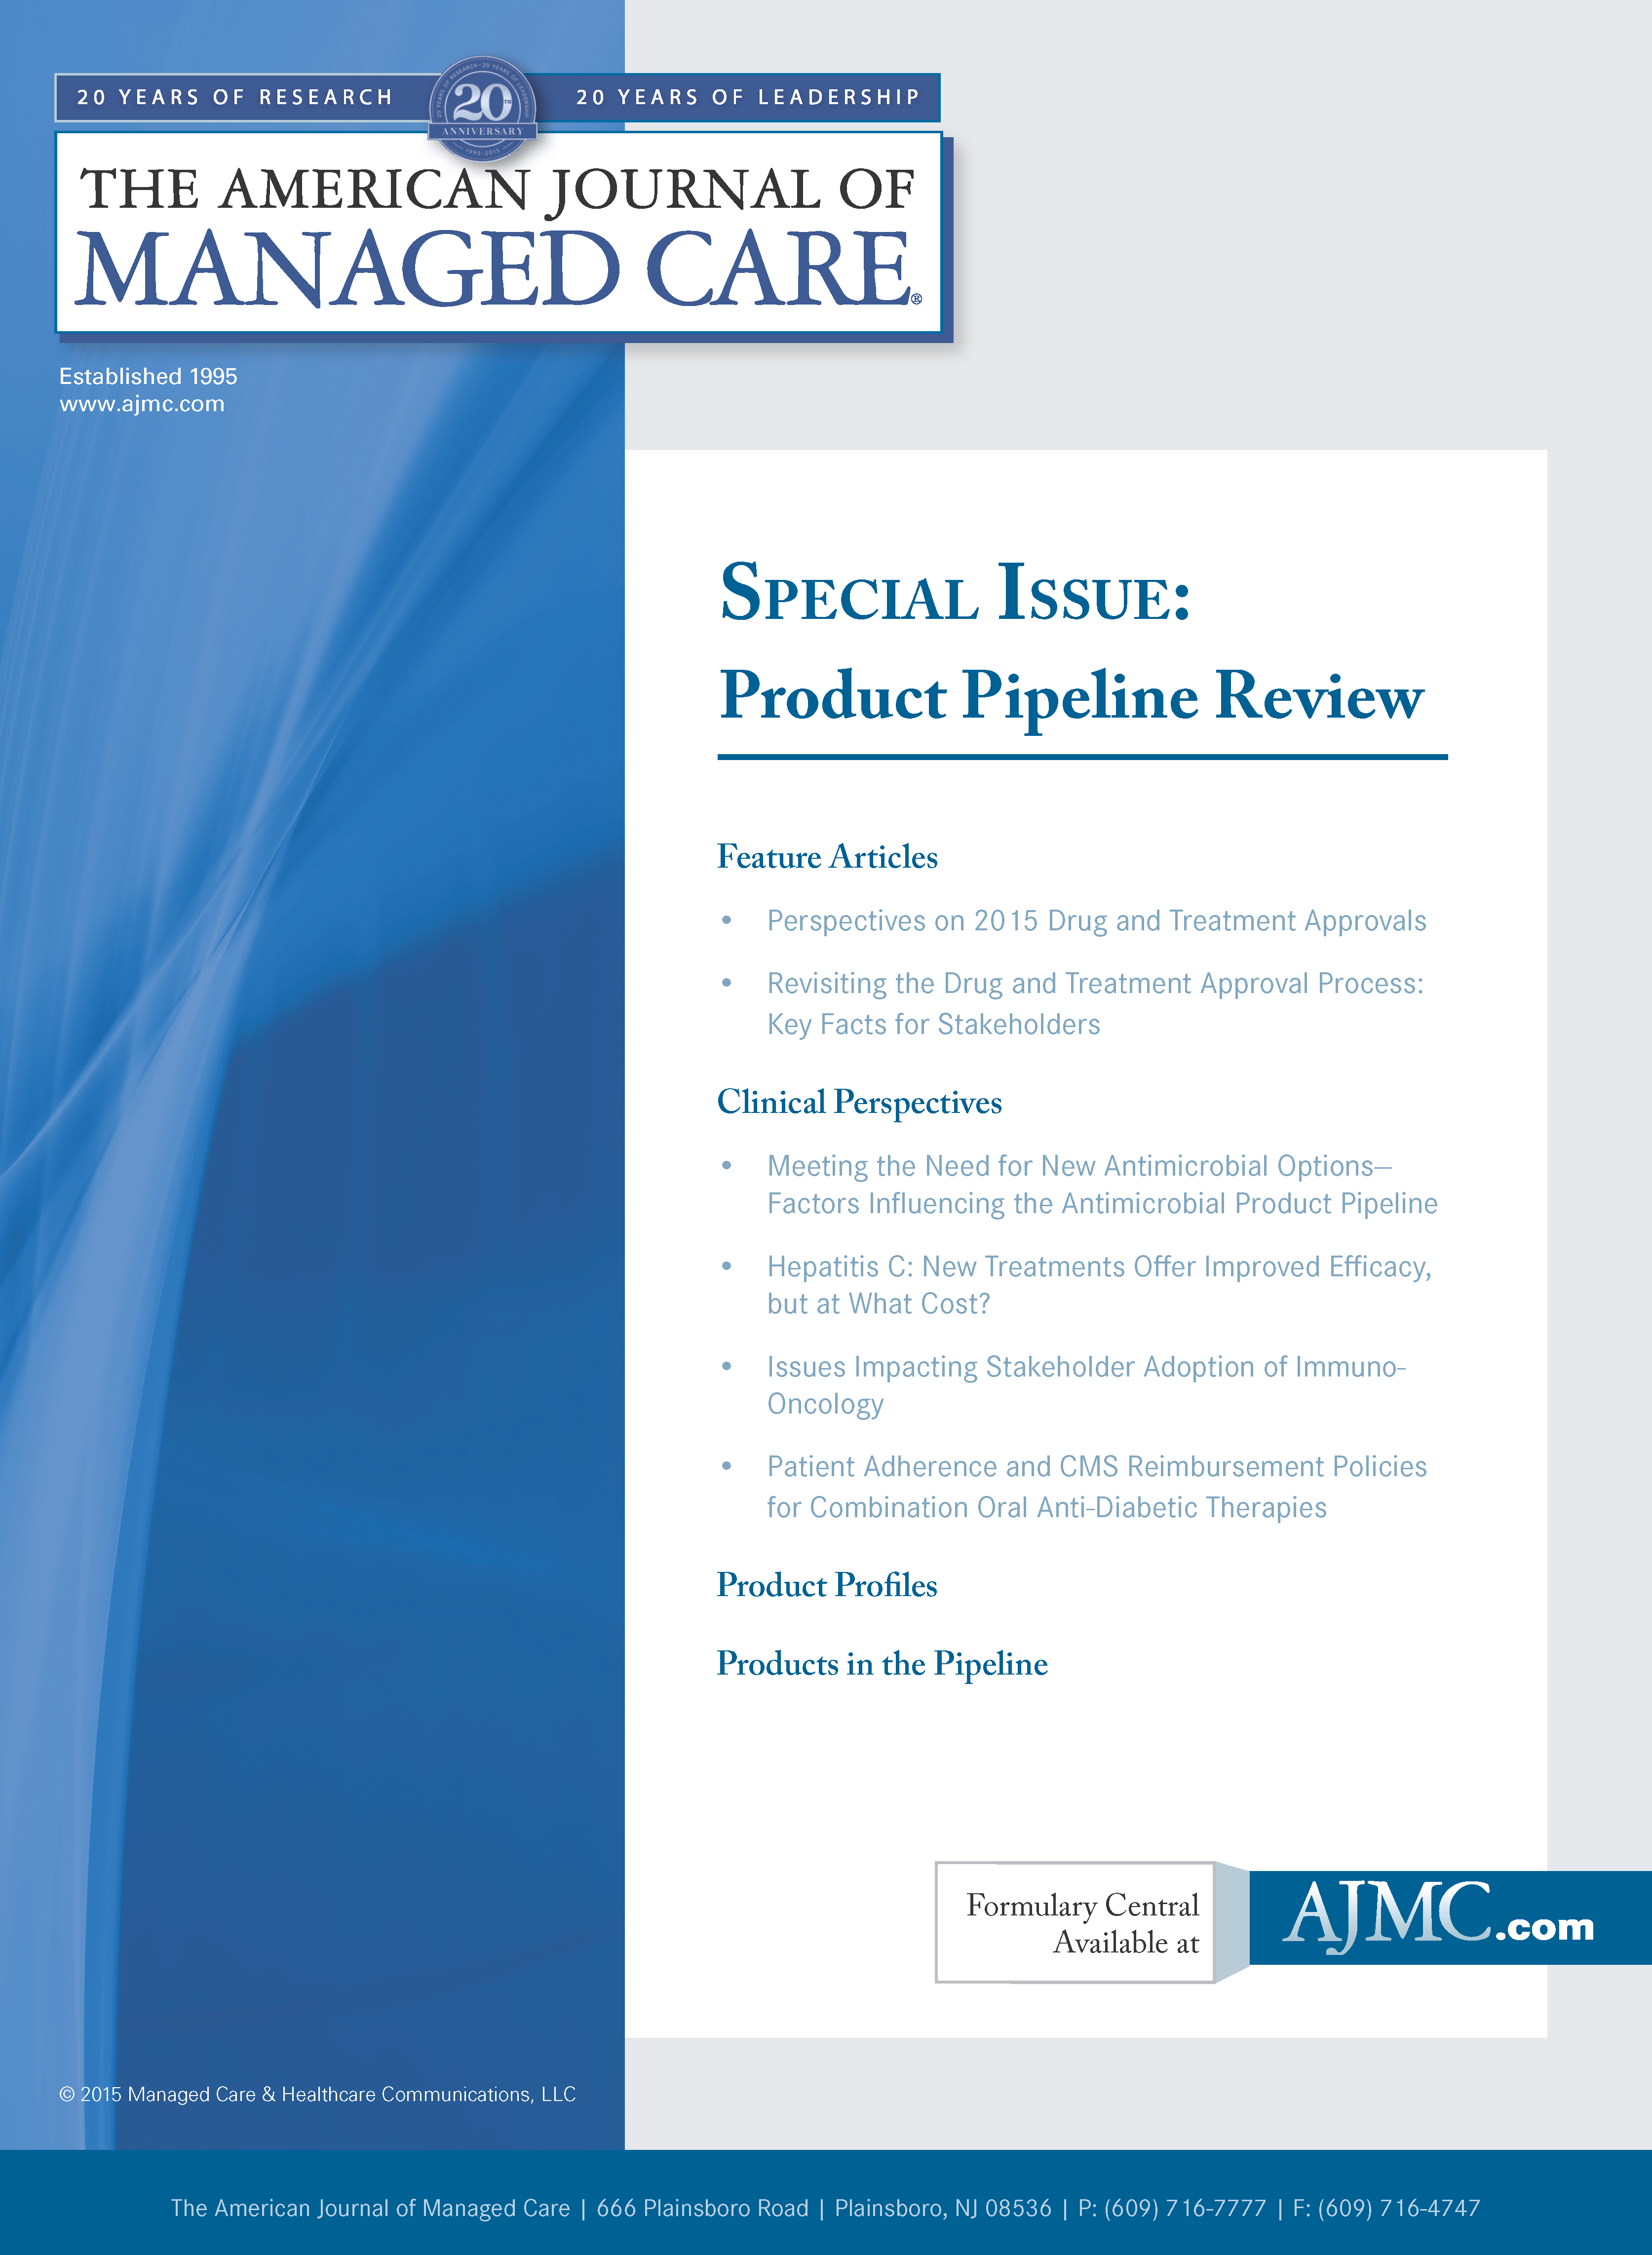 Special Issue: Product Pipeline Review [June]